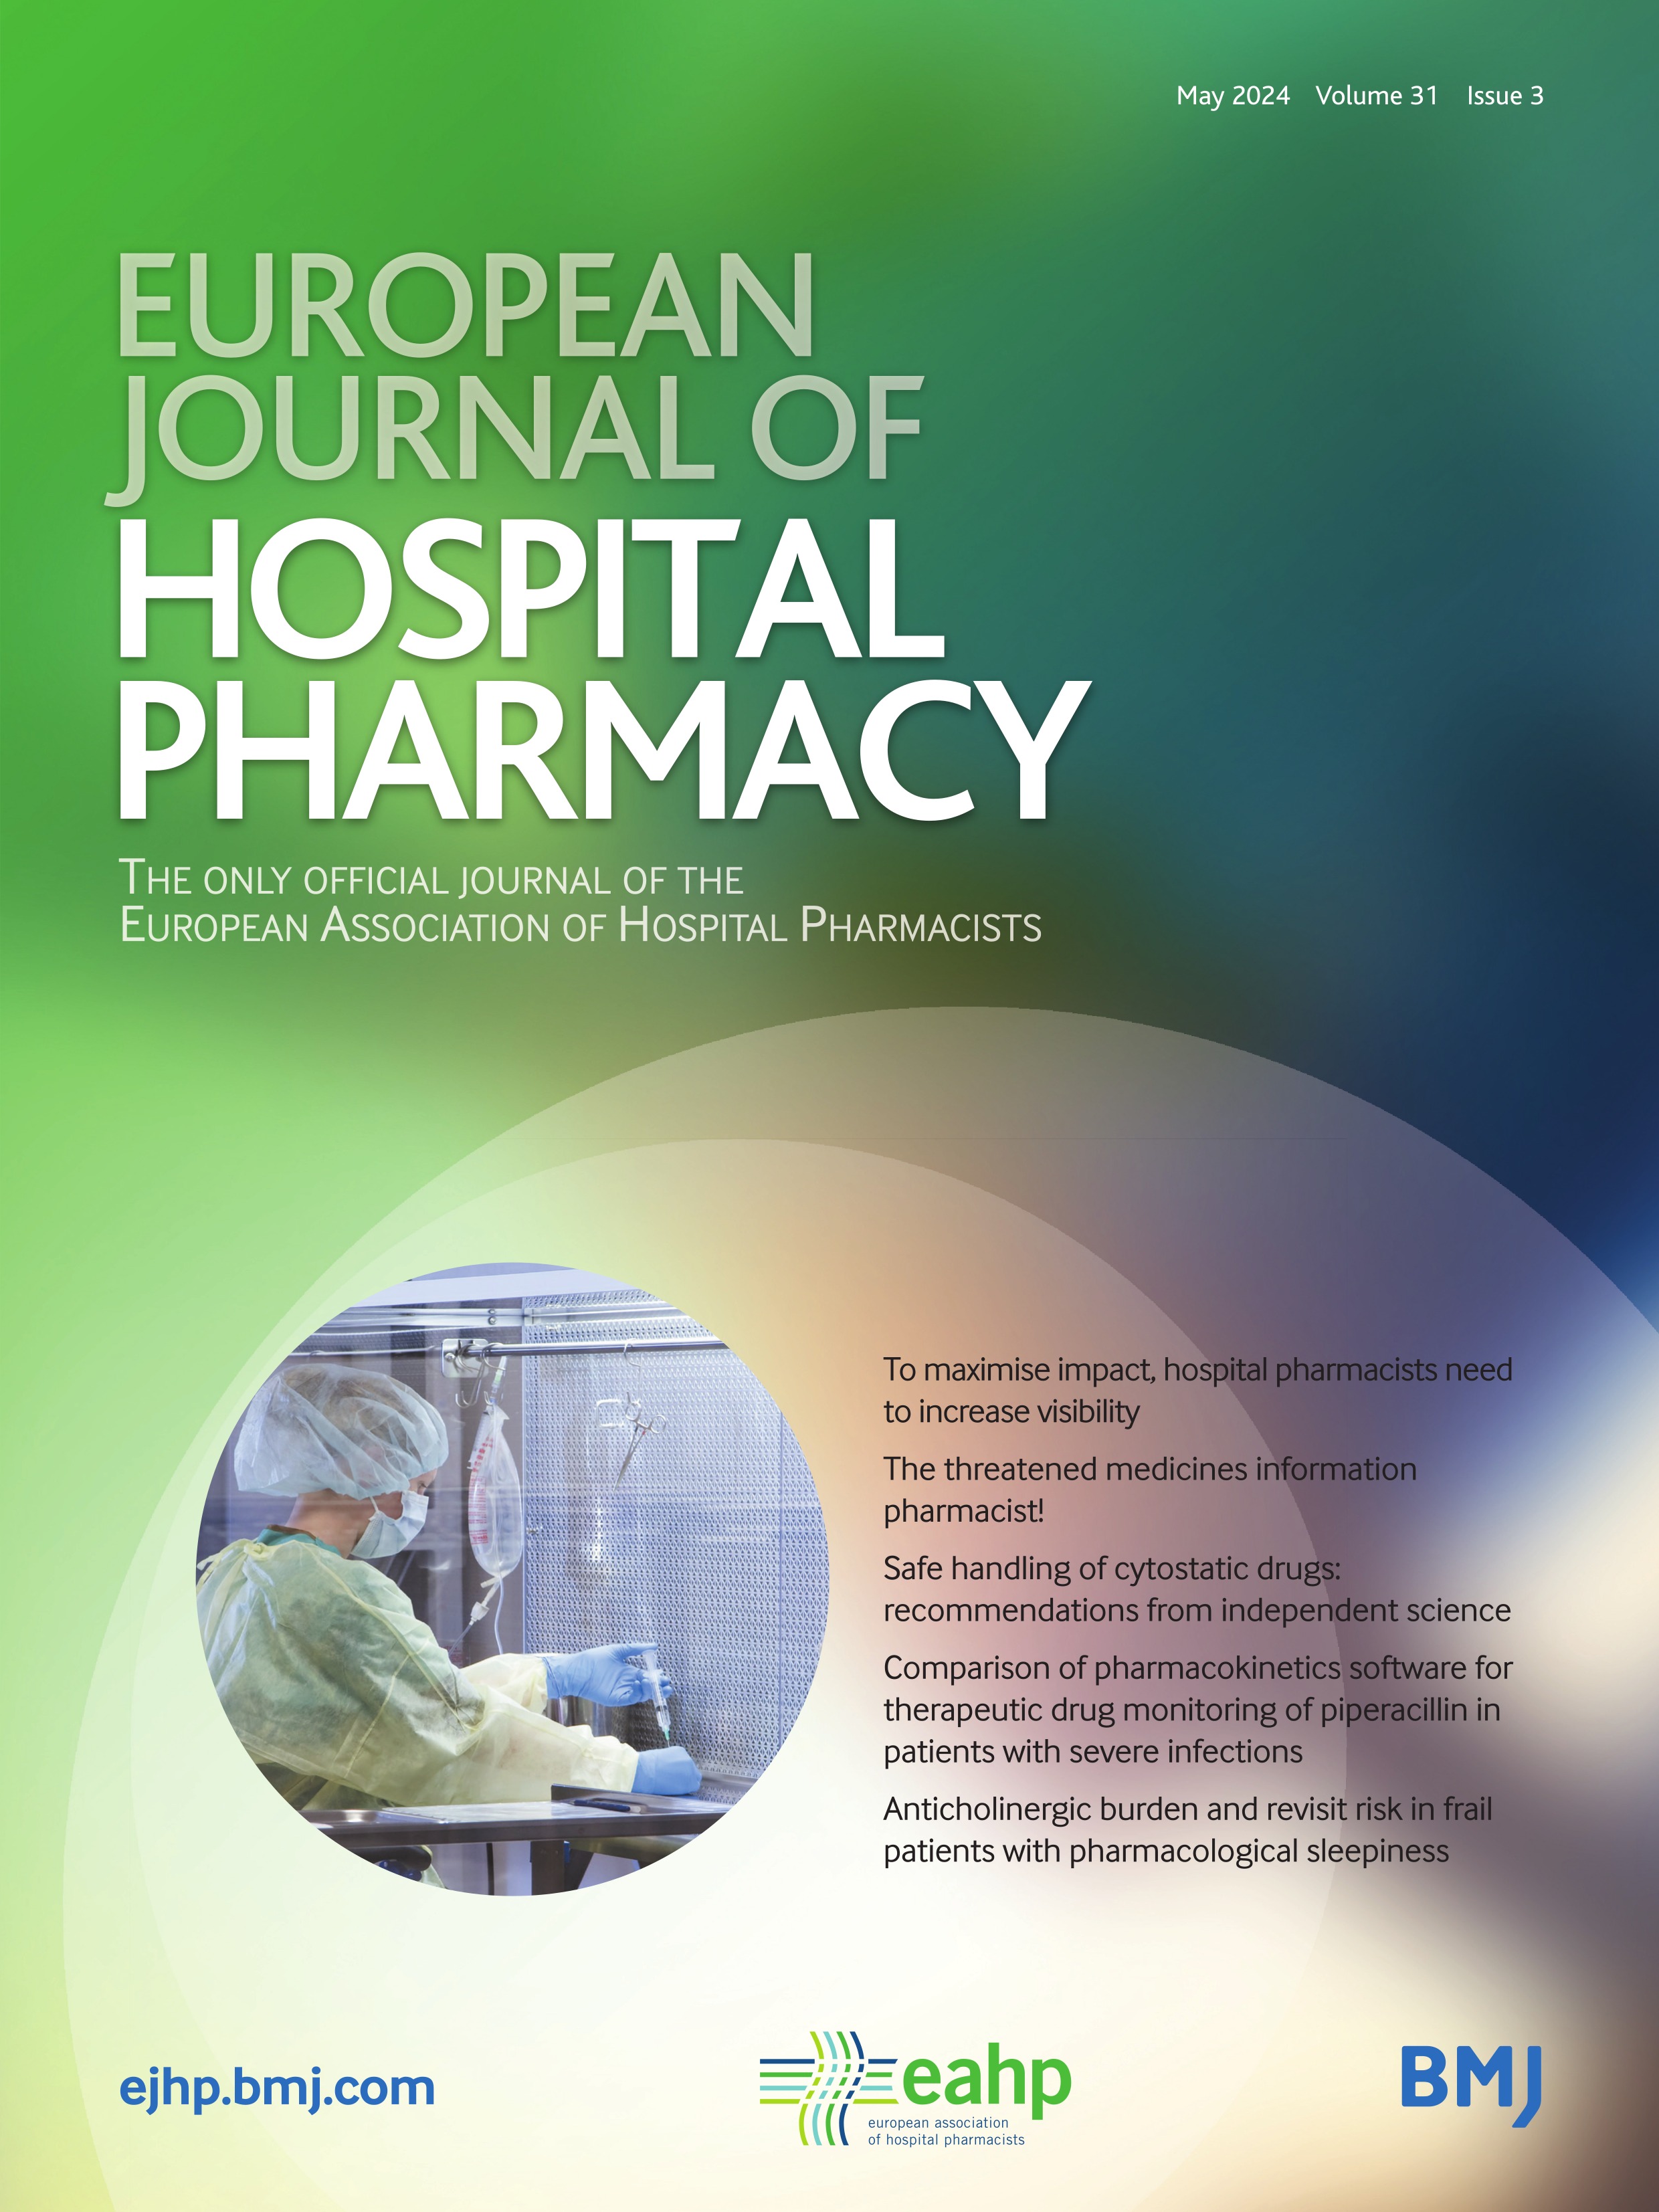 Clinical benefits of therapeutic drug monitoring of vancomycin therapy in patients with postoperative intracerebral hemorrhage: a retrospective cohort study